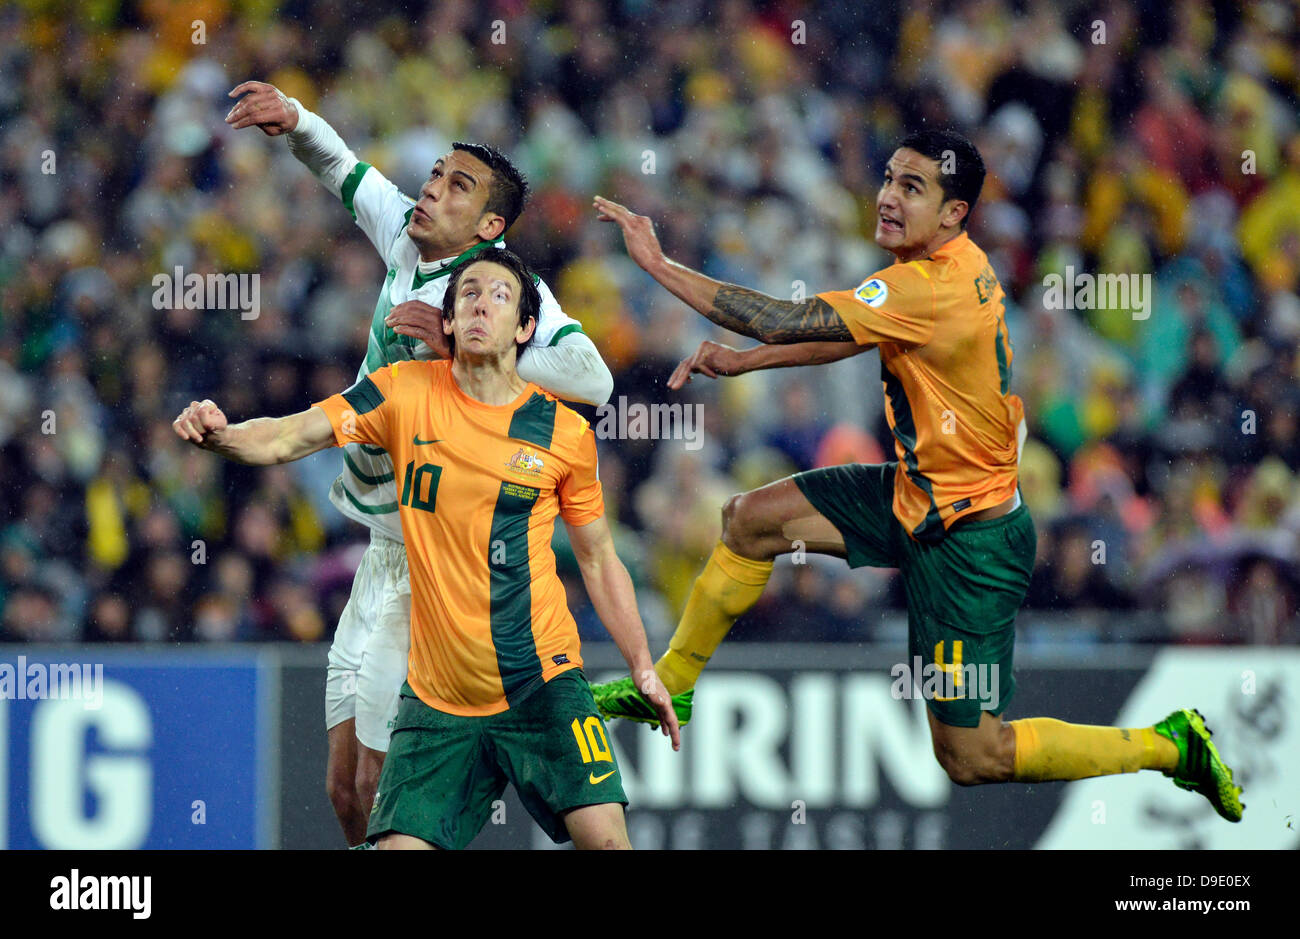 18.06.2013 Sydney, Australia. Socceroos forward Tim Cahill and Socceroos forward Robbie Kruse in action during the World Cup qualifier between Australia and Iraq at the ANZ Stadium, Sydney. Australia won 1-0. Stock Photo